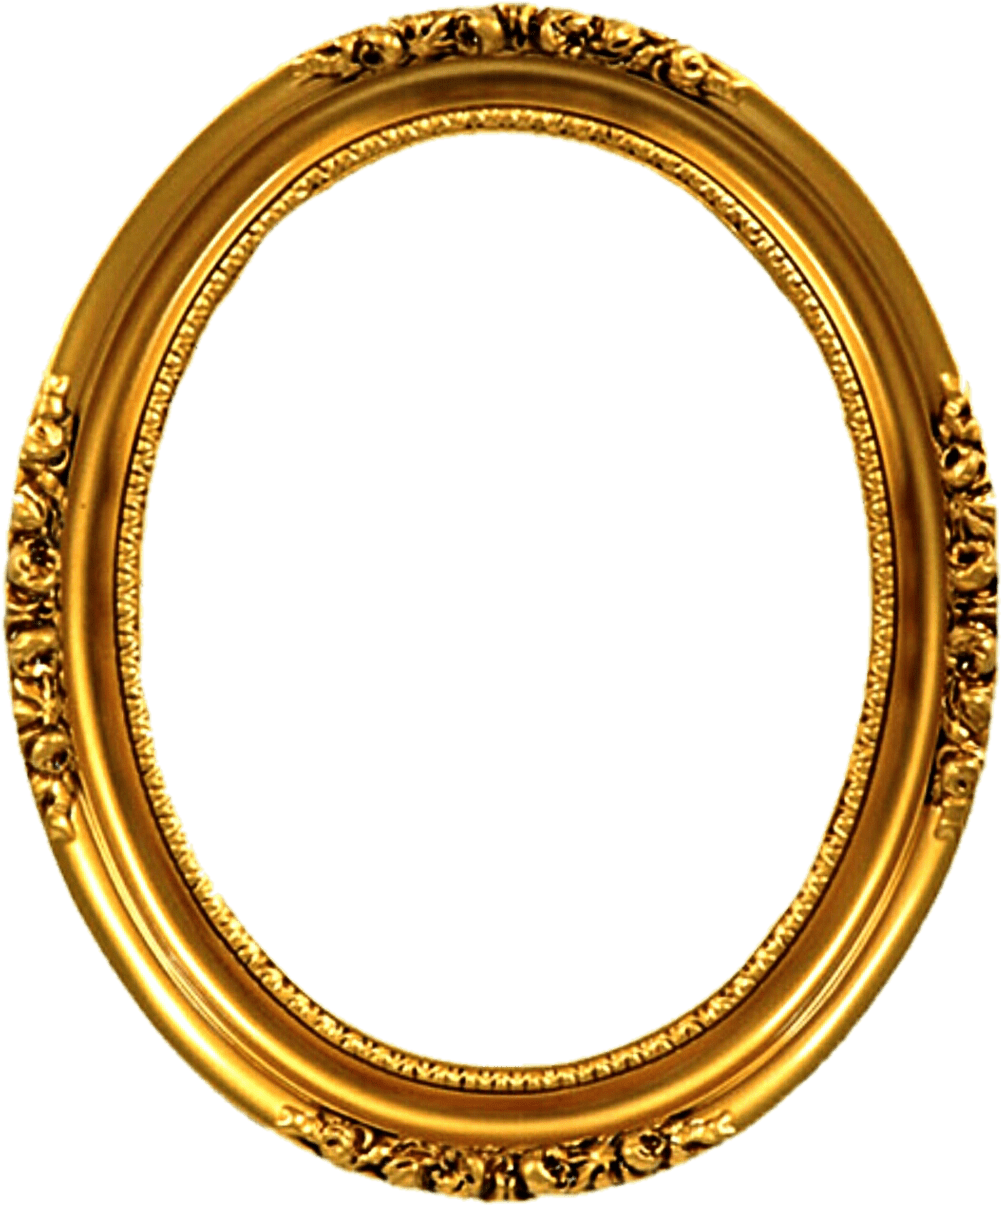 Old Oval Picture Frames (1024x1229)